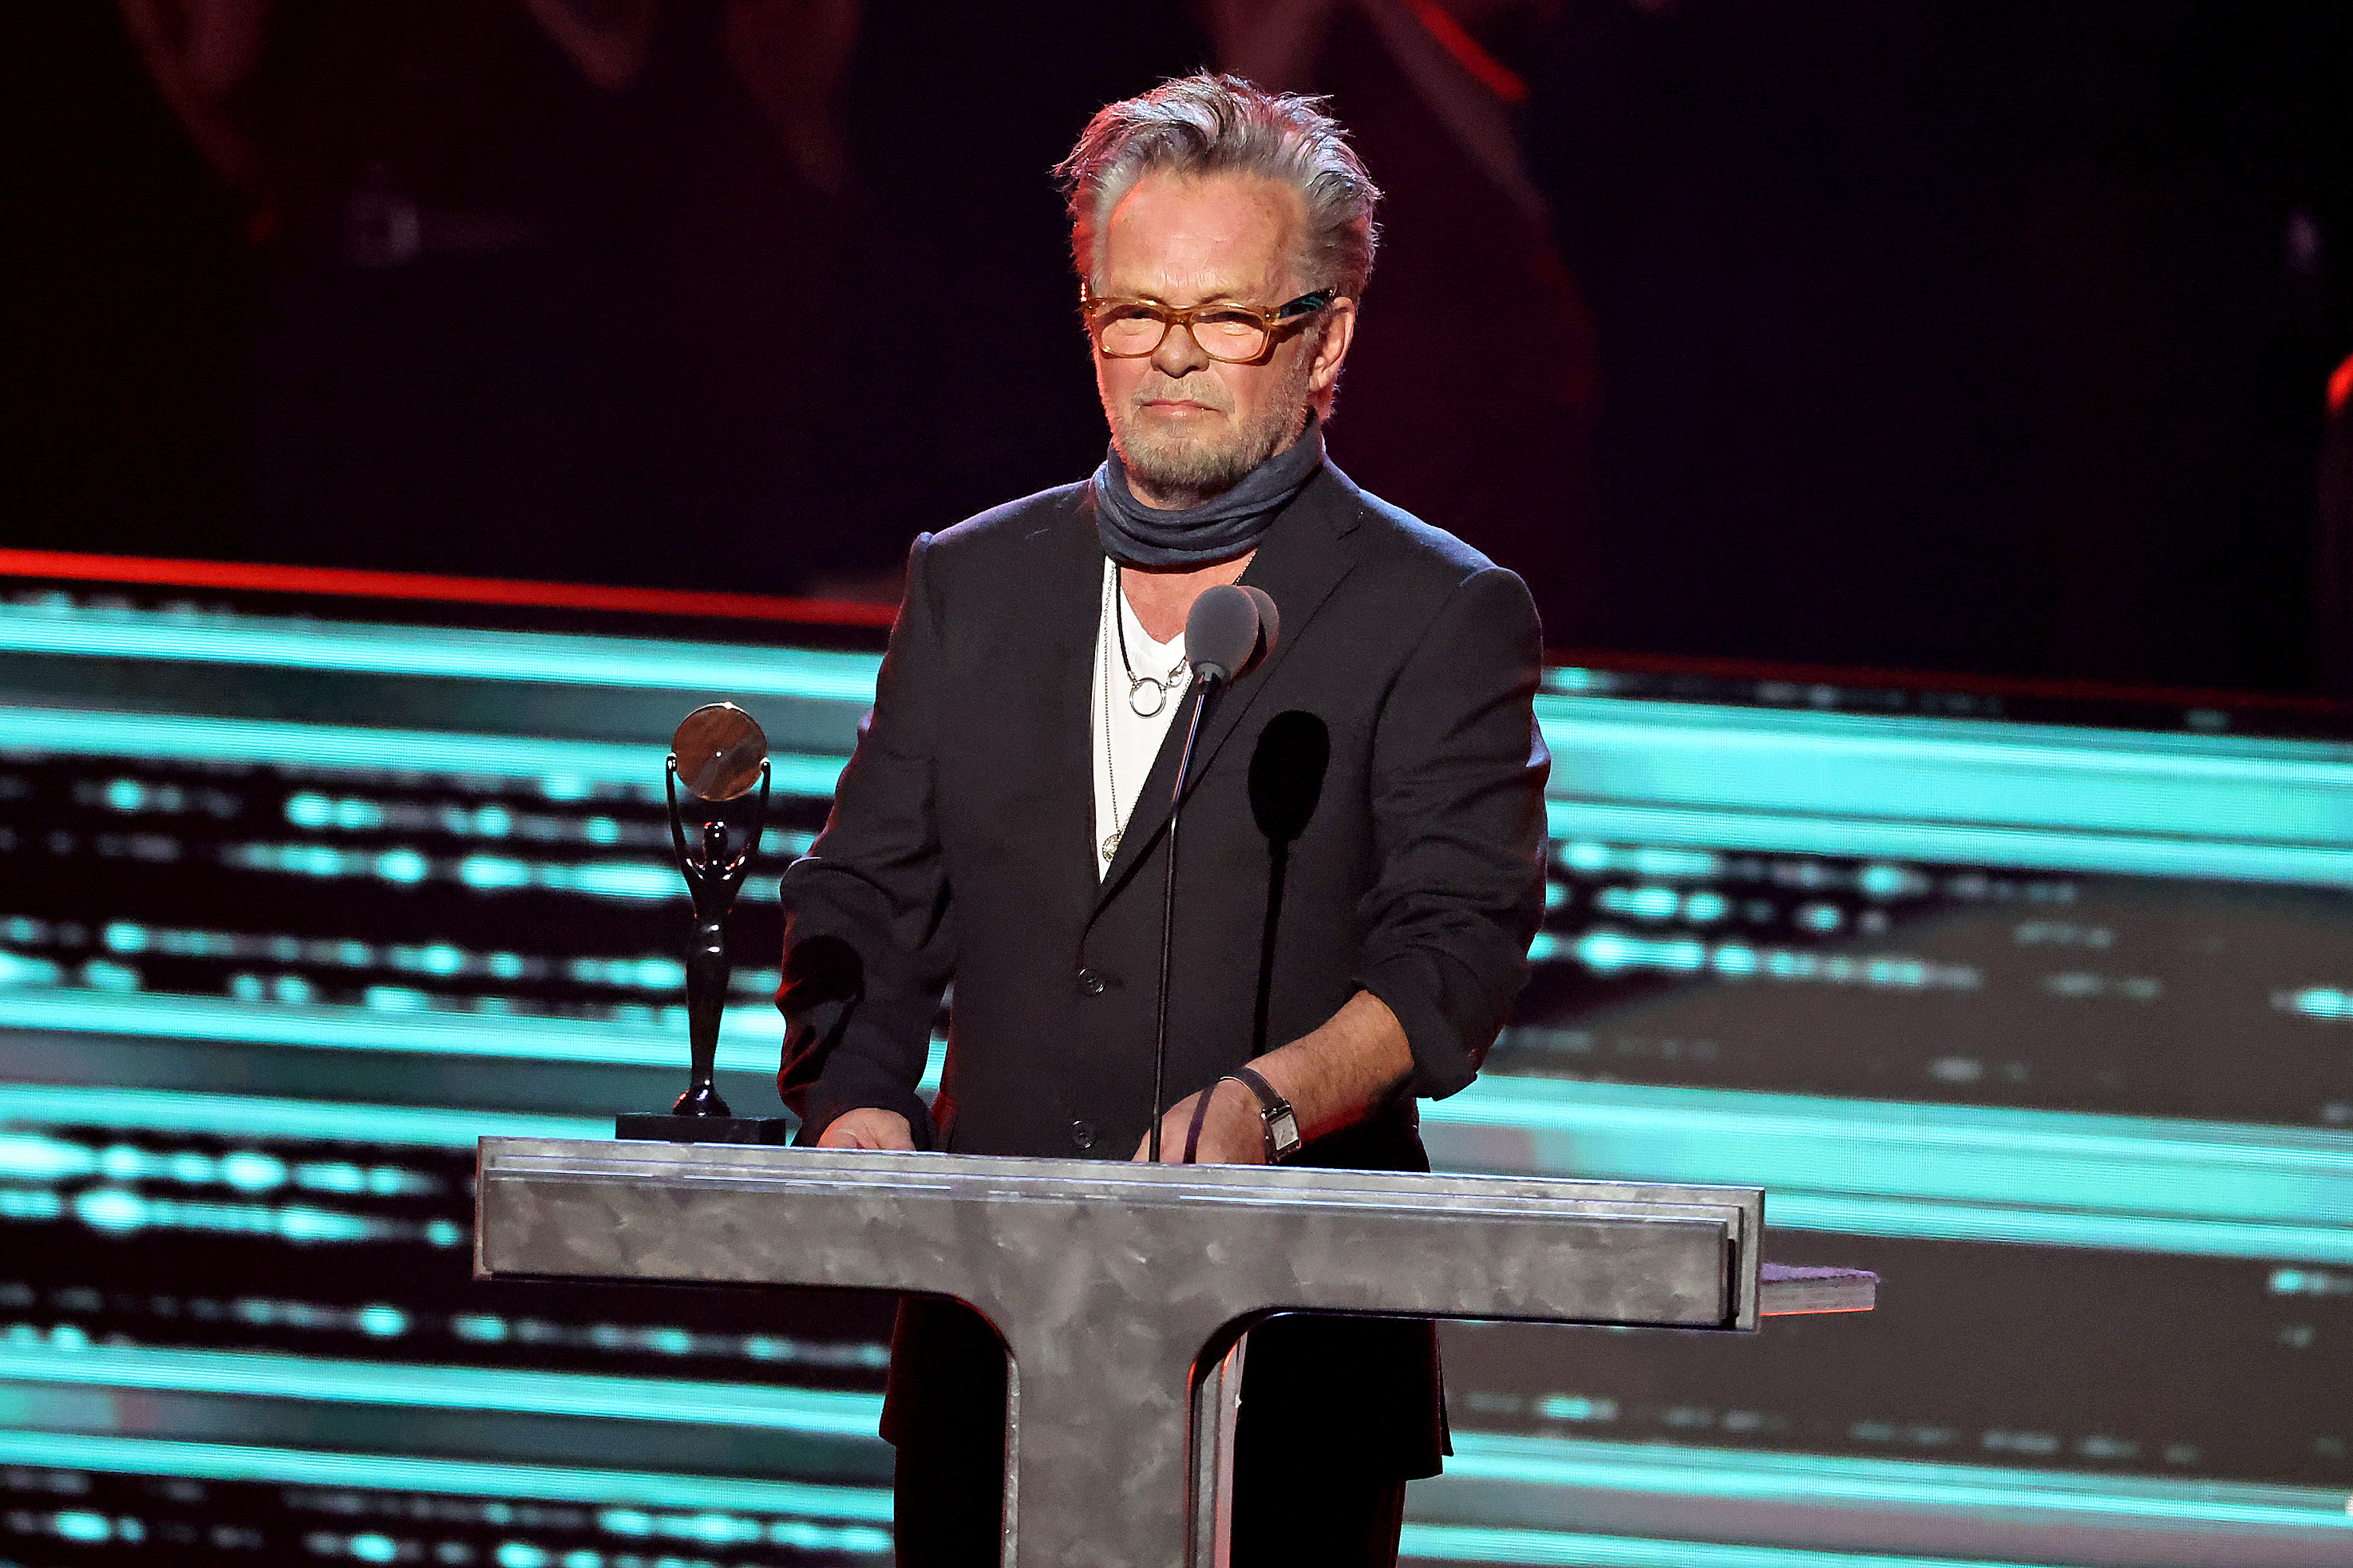 John Mellencamp onstage during the 37th Annual Rock & Roll Hall of Fame Induction Ceremony on November 5, 2022, in Los Angeles, California | Source: Getty Images